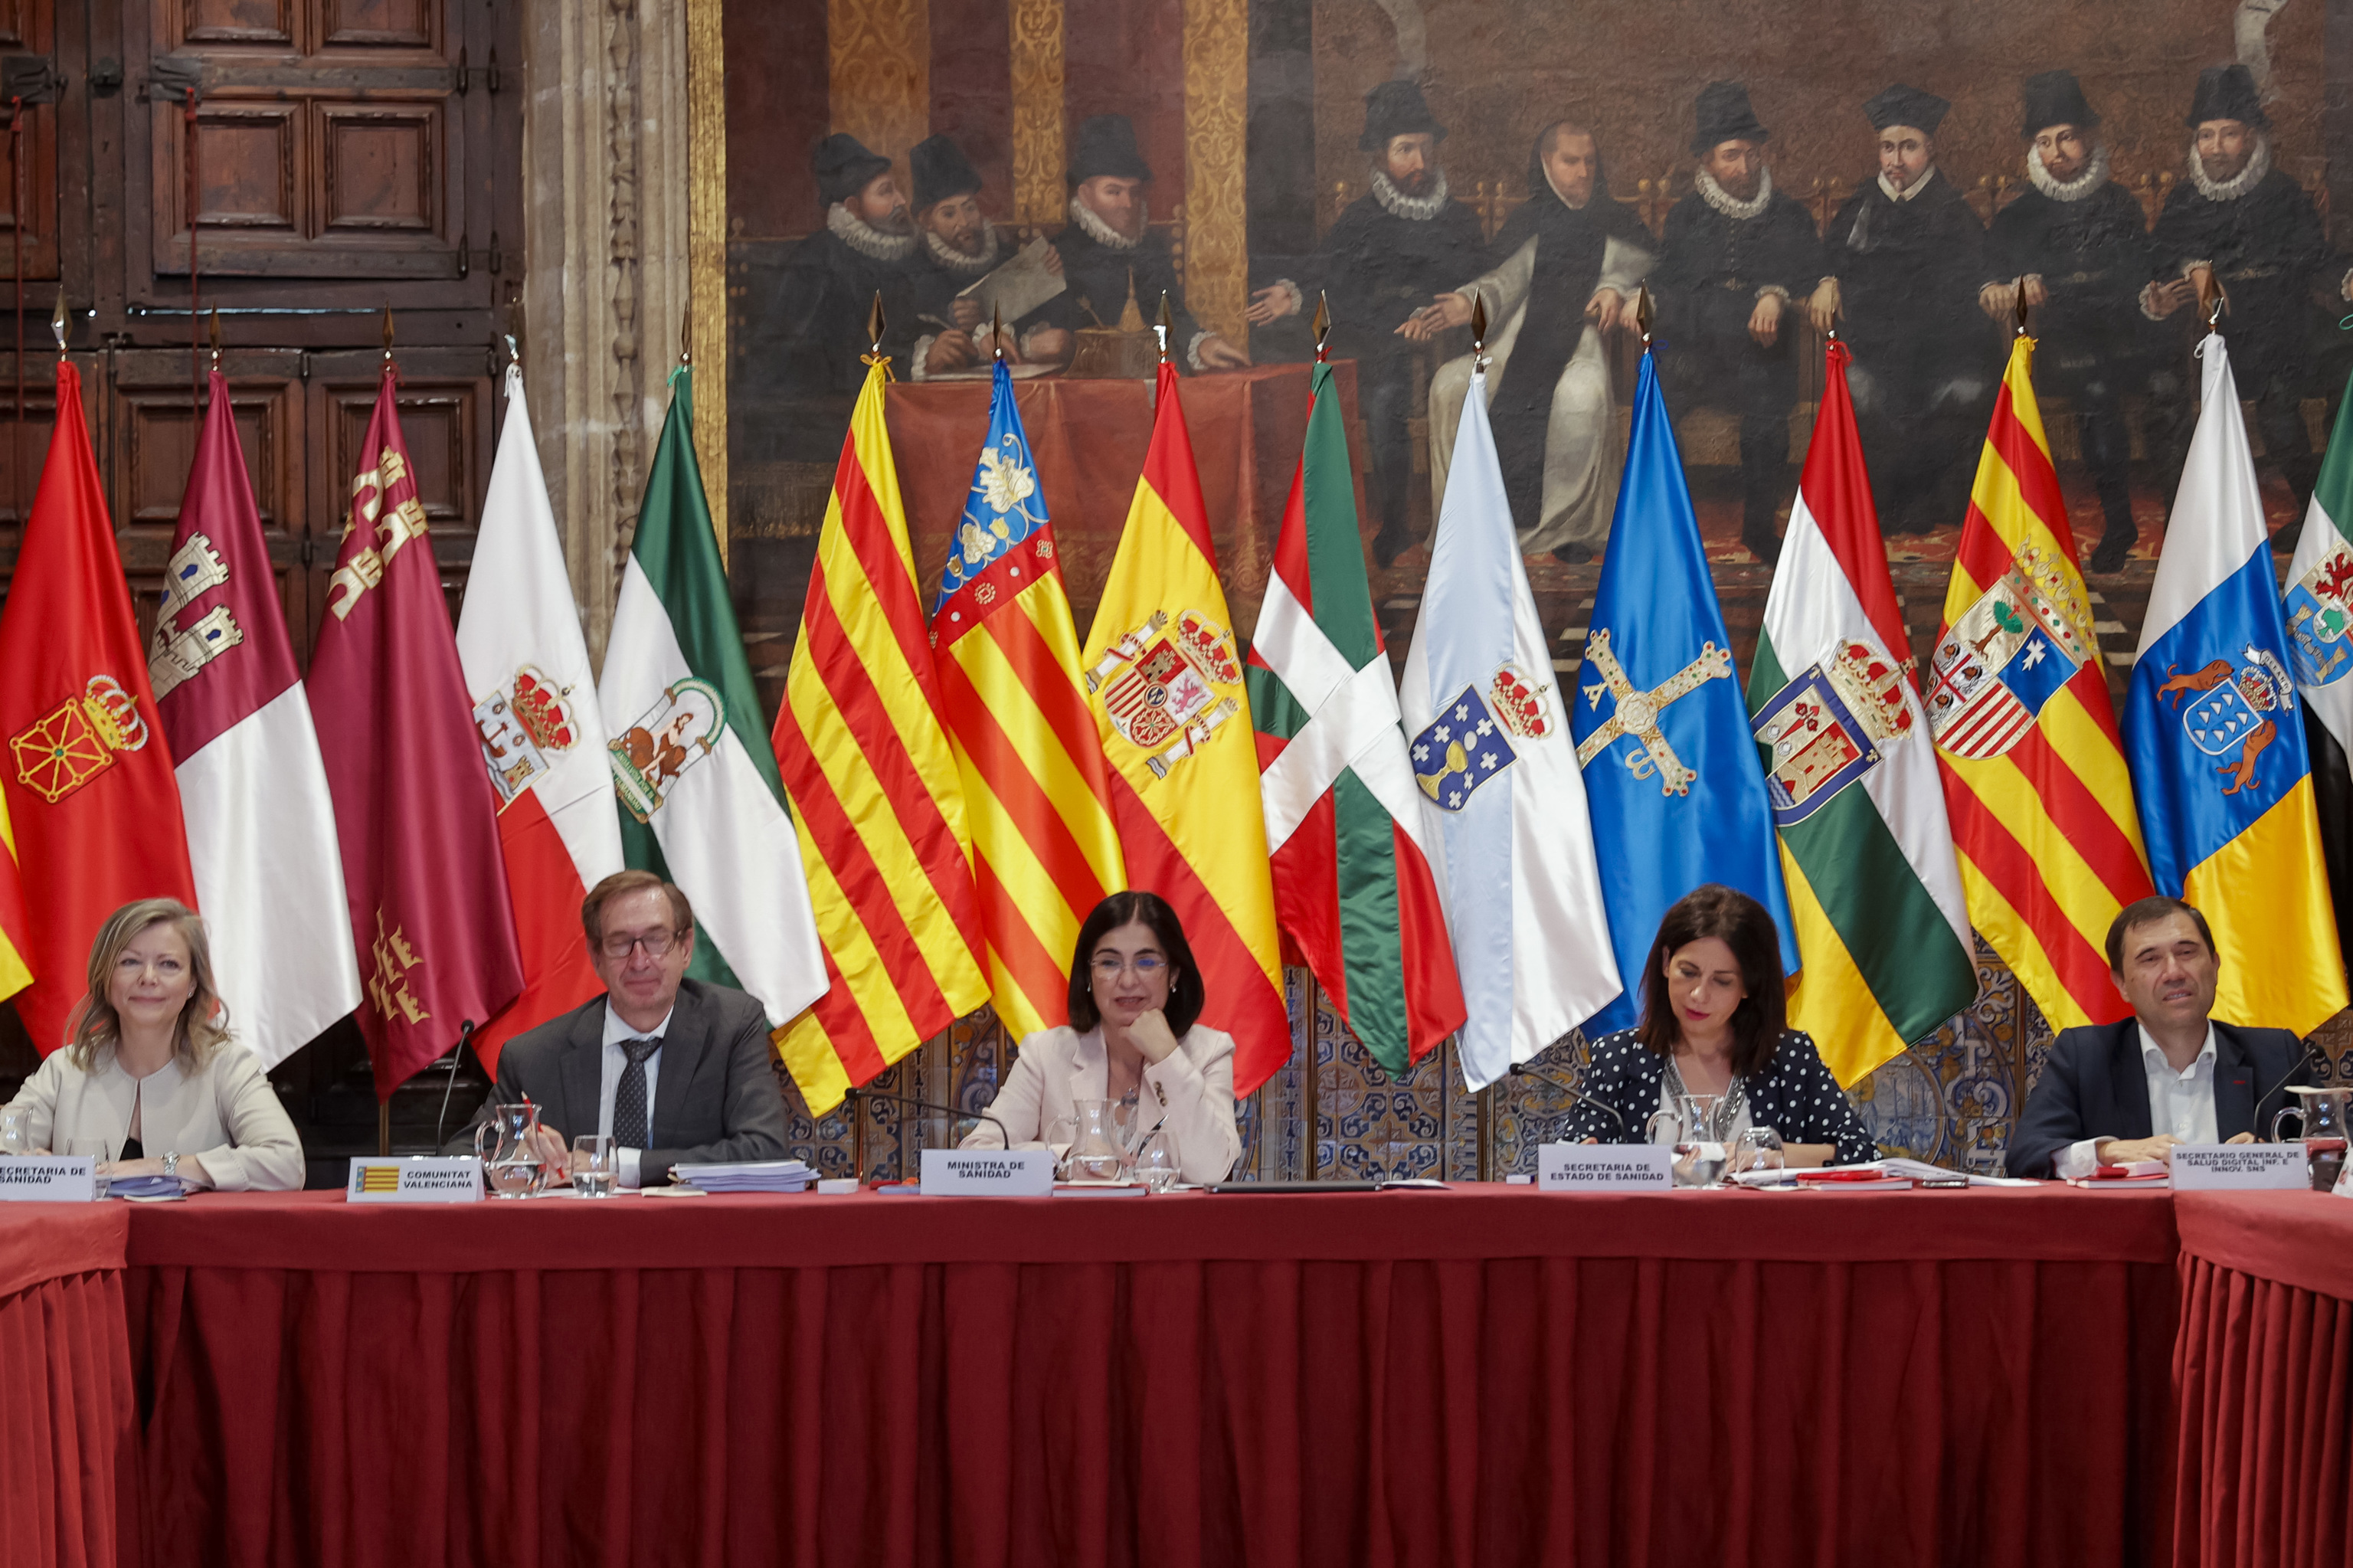 The Interterritorial Council, chaired by Minister Carolina Darius, met